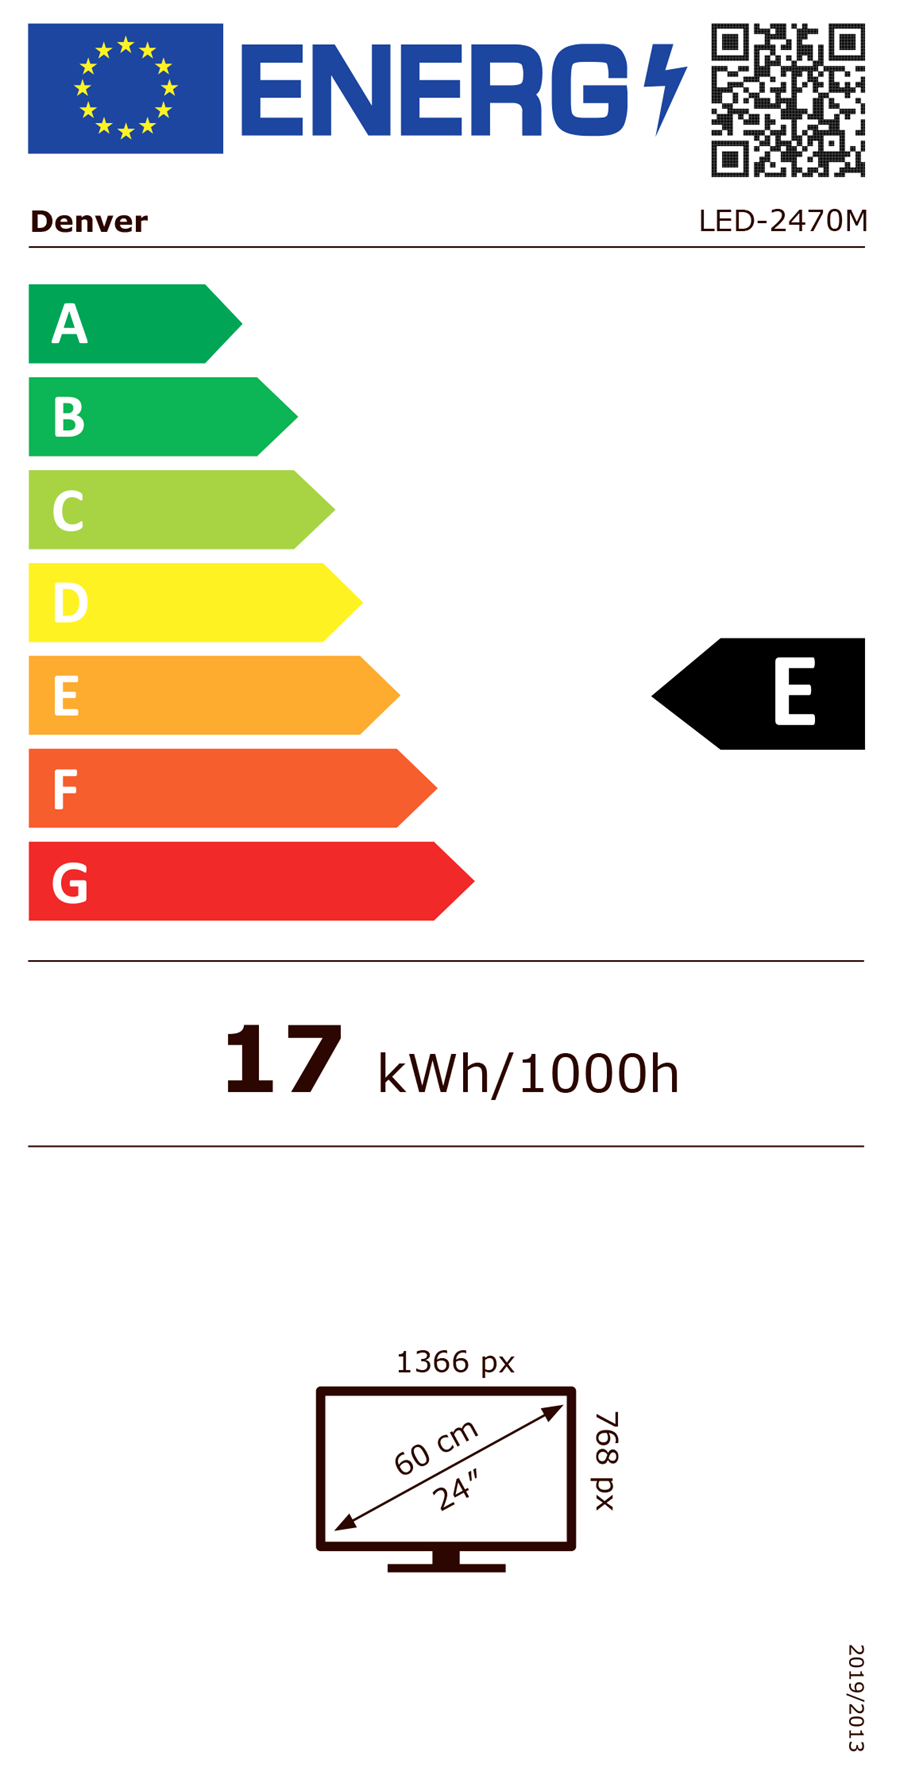 Energy label - LED-2470M.png